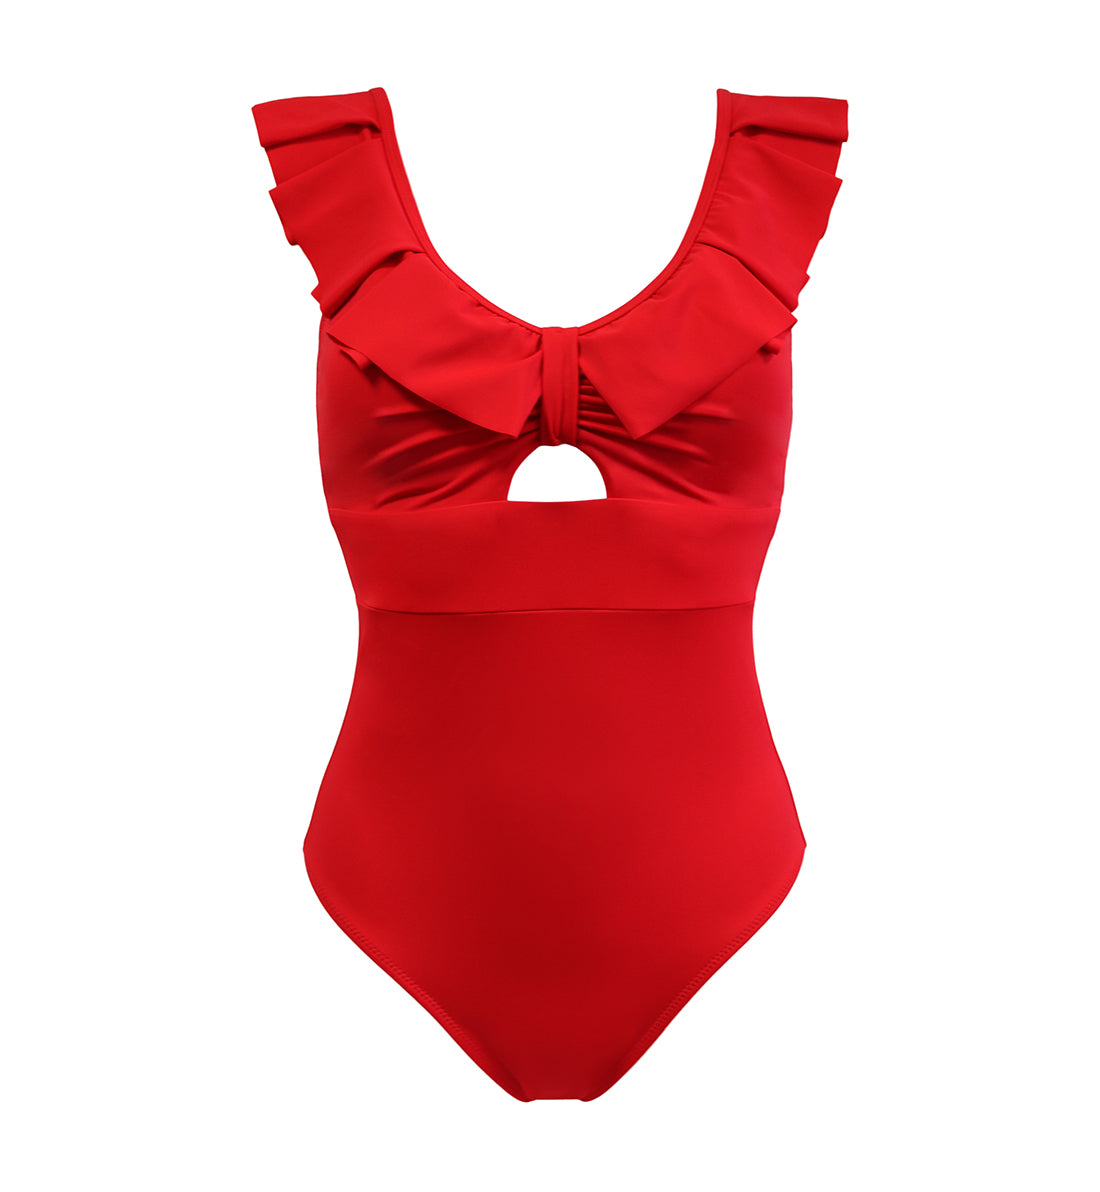 Pour Moi Space Frill Non Wire Swimsuit (18106),Small,Red - Red,Small